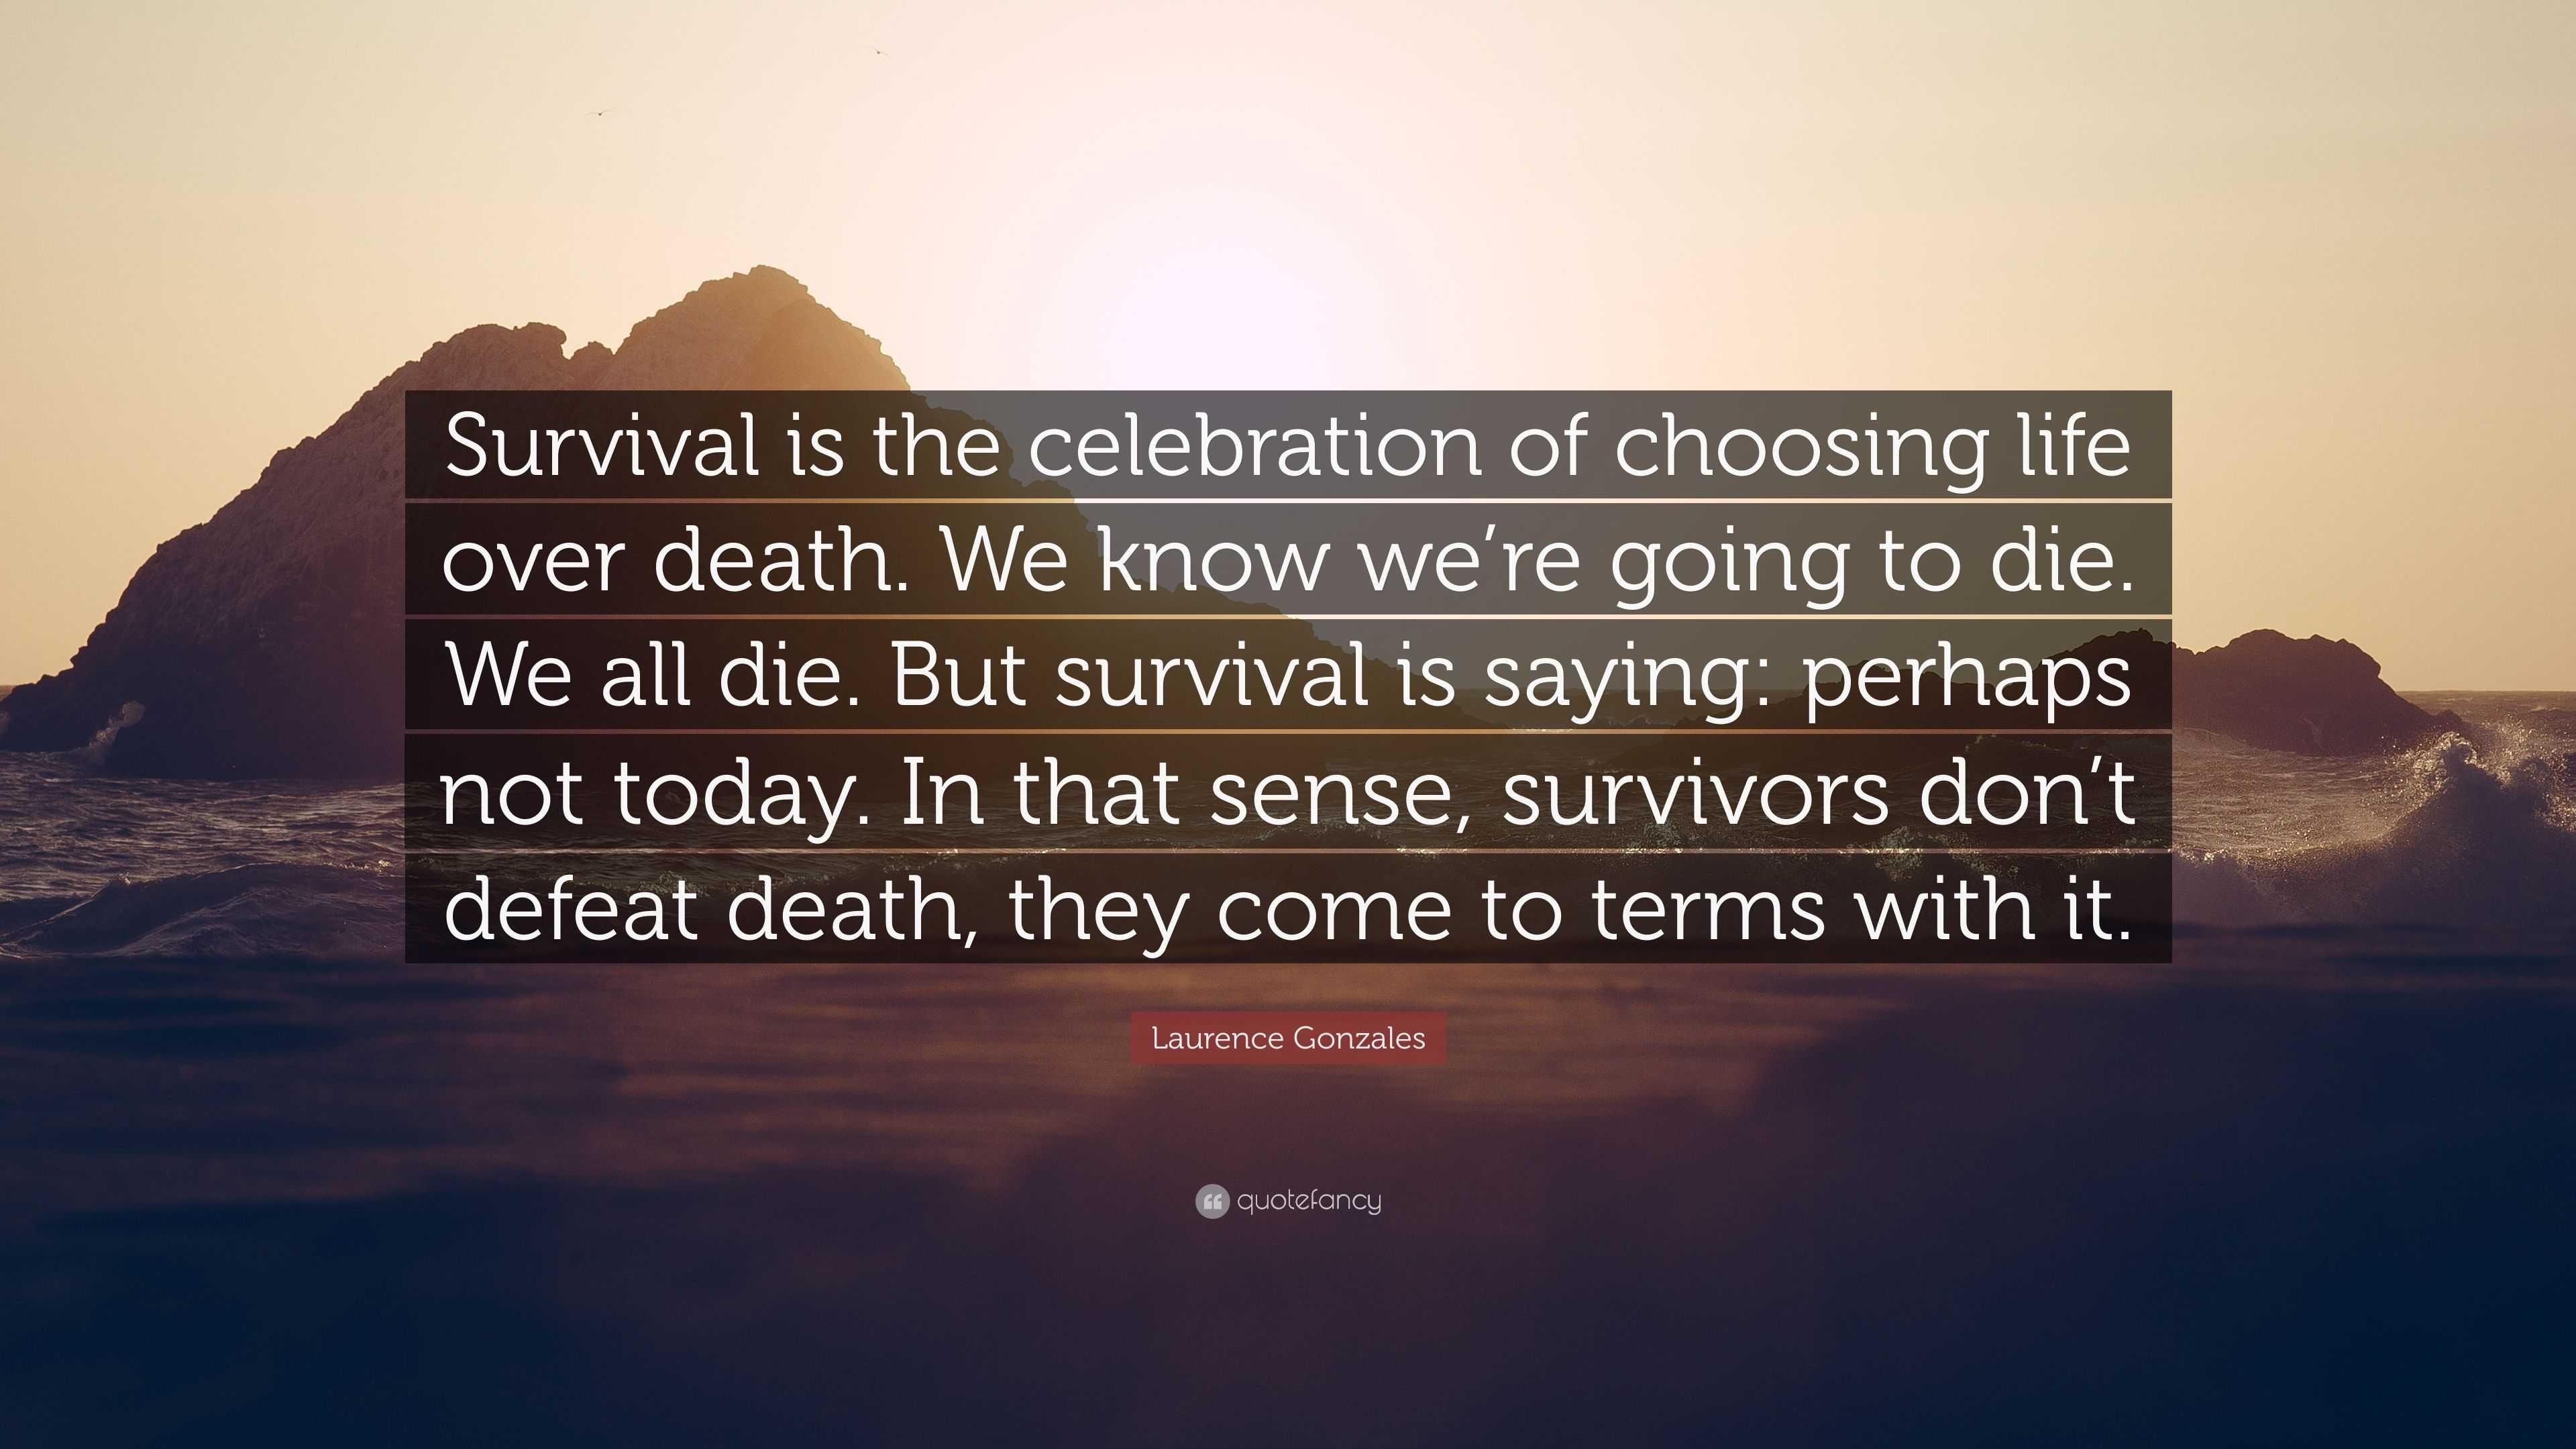 Laurence Gonzales Quote: “Survival is the celebration of choosing life